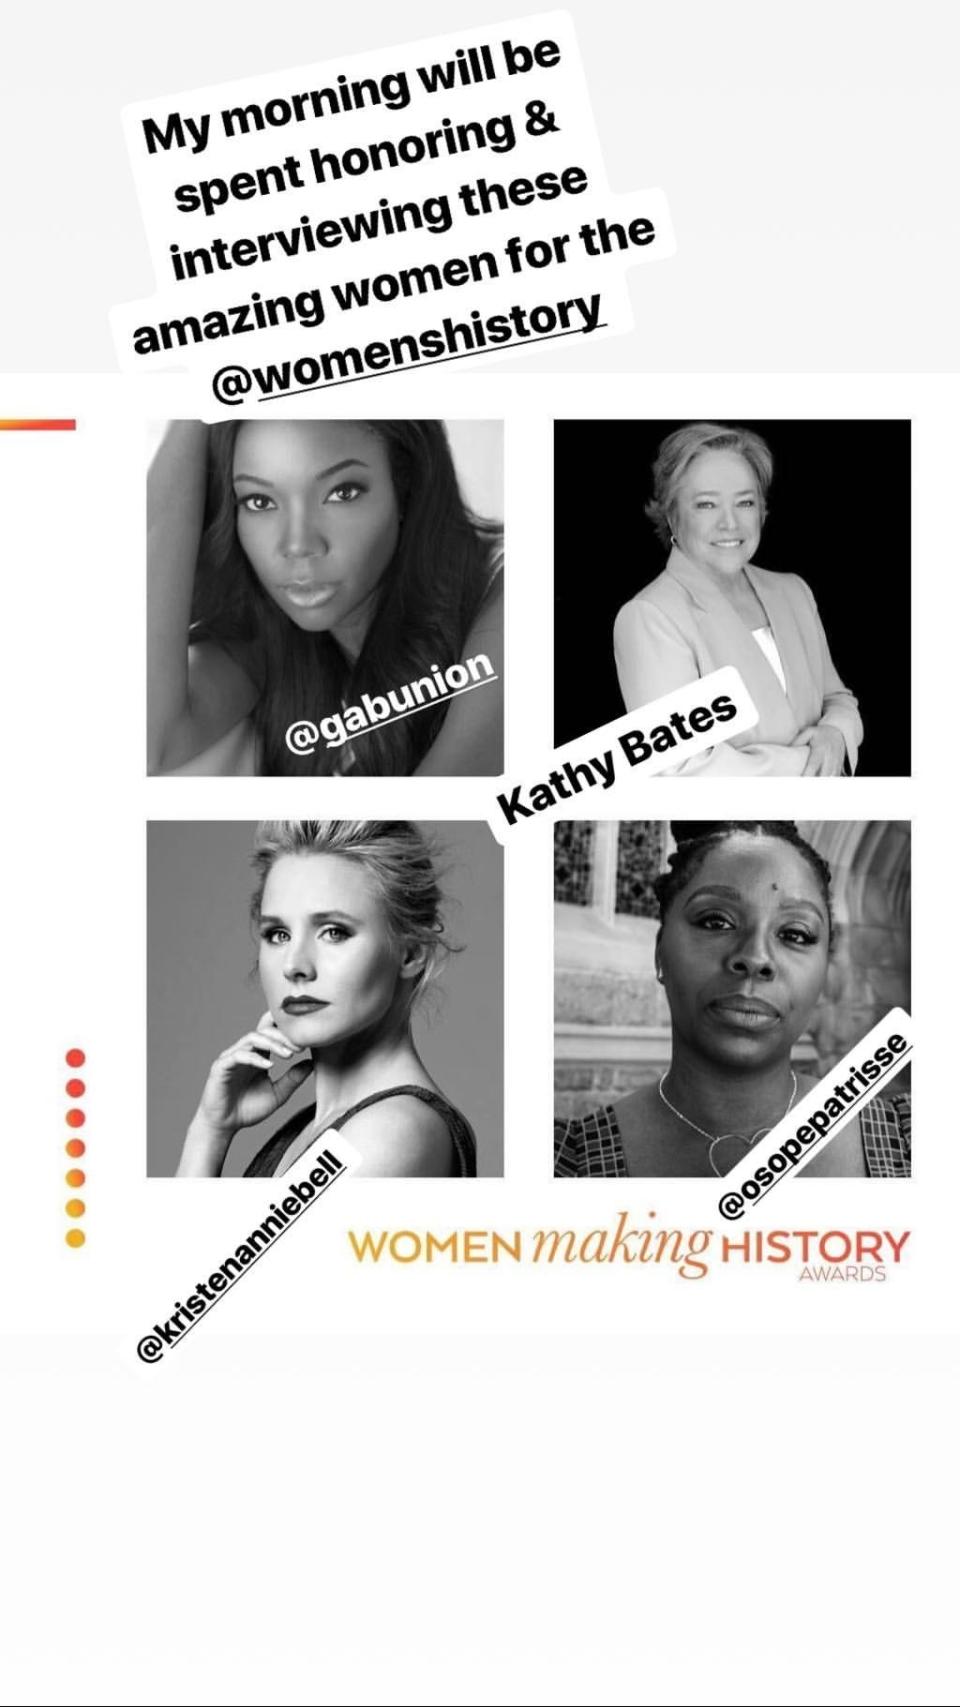 Leaders like Kristen Bell, Gabrielle Union, and Patrisse Cullors were recognized by the National Women's History Museum for their advocacy on Saturday.